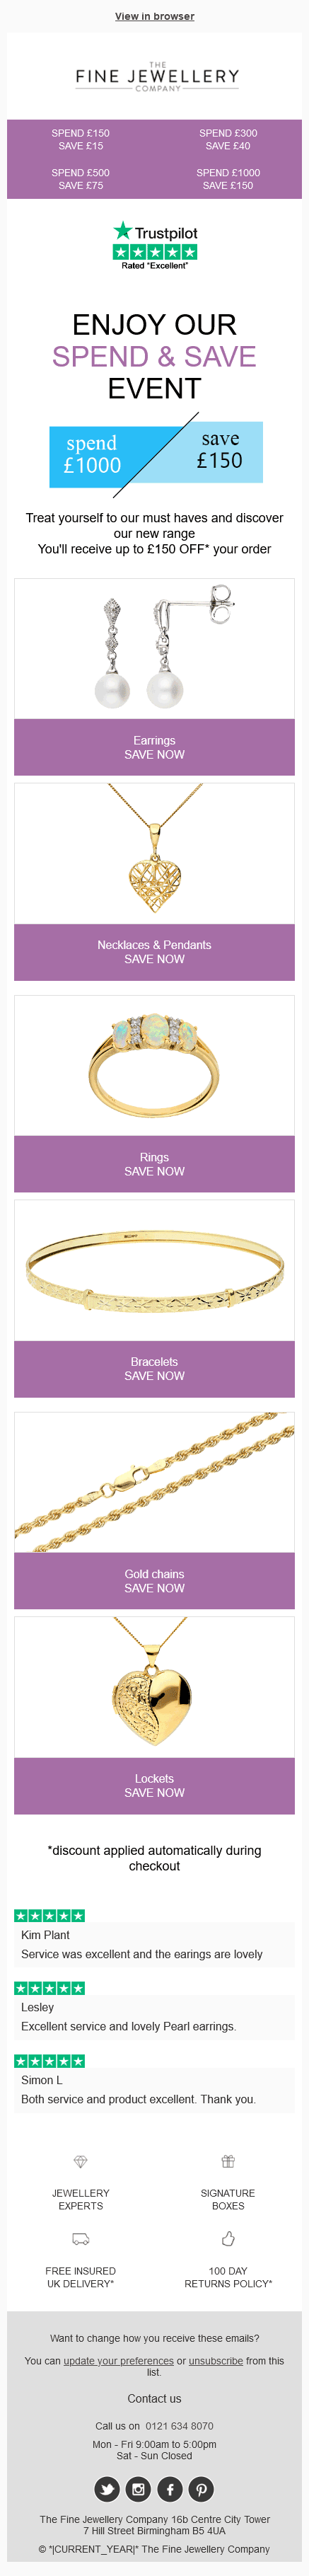 Email Templates Created For The Fine Jewellery CompanyMarketing Jewellery mobile design